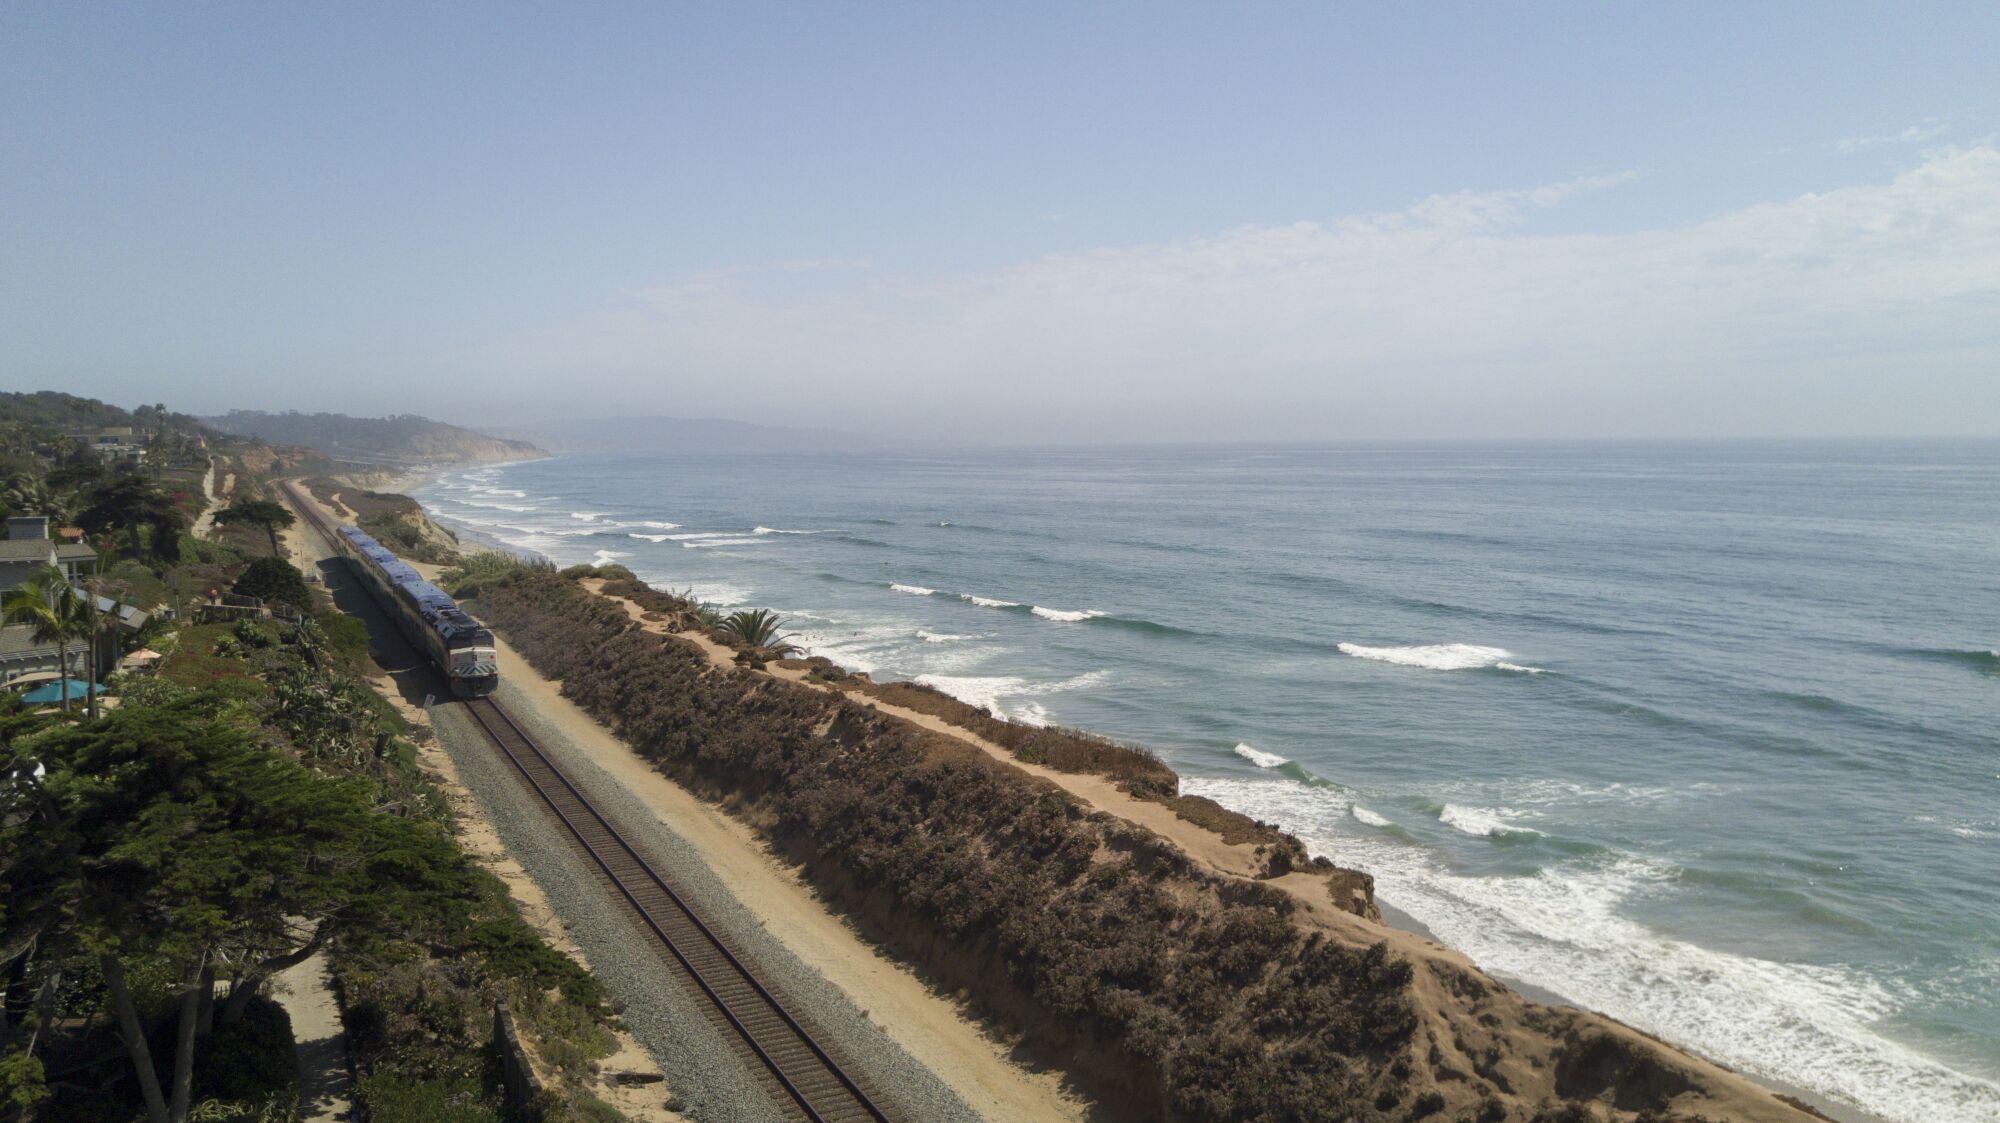 A Surfliner train by Amtrak travels along the collapsing bluffs in Del Mar.